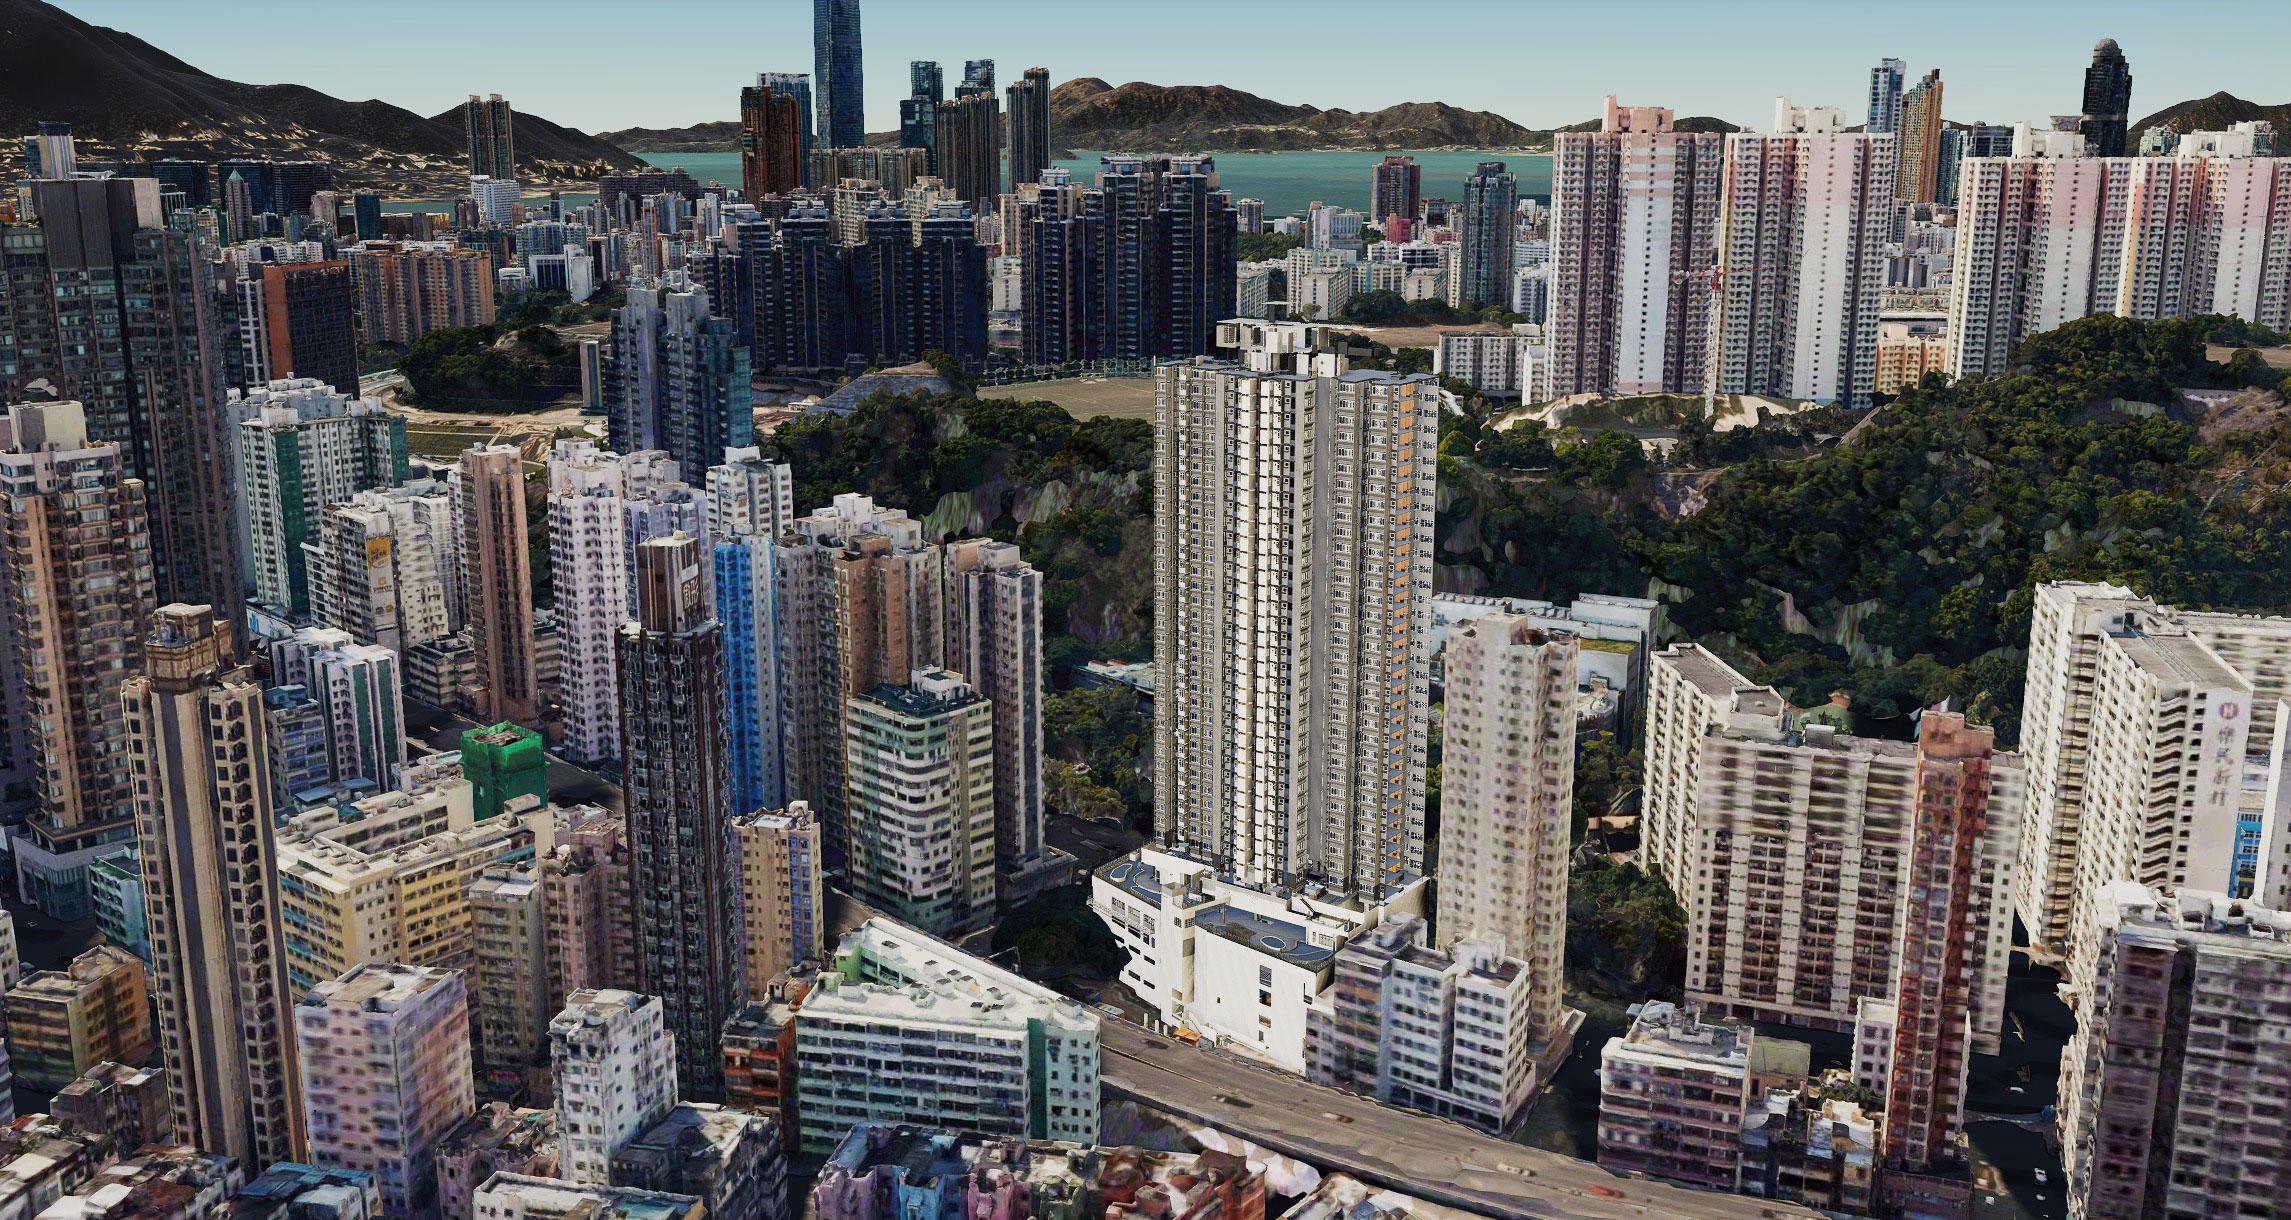 The Hong Kong Housing Authority has developed the Project Information Management and Analytics Platform (HA-PIMAP). Photo shows the integration of building information modelling and geographic information system to optimise planning and design.